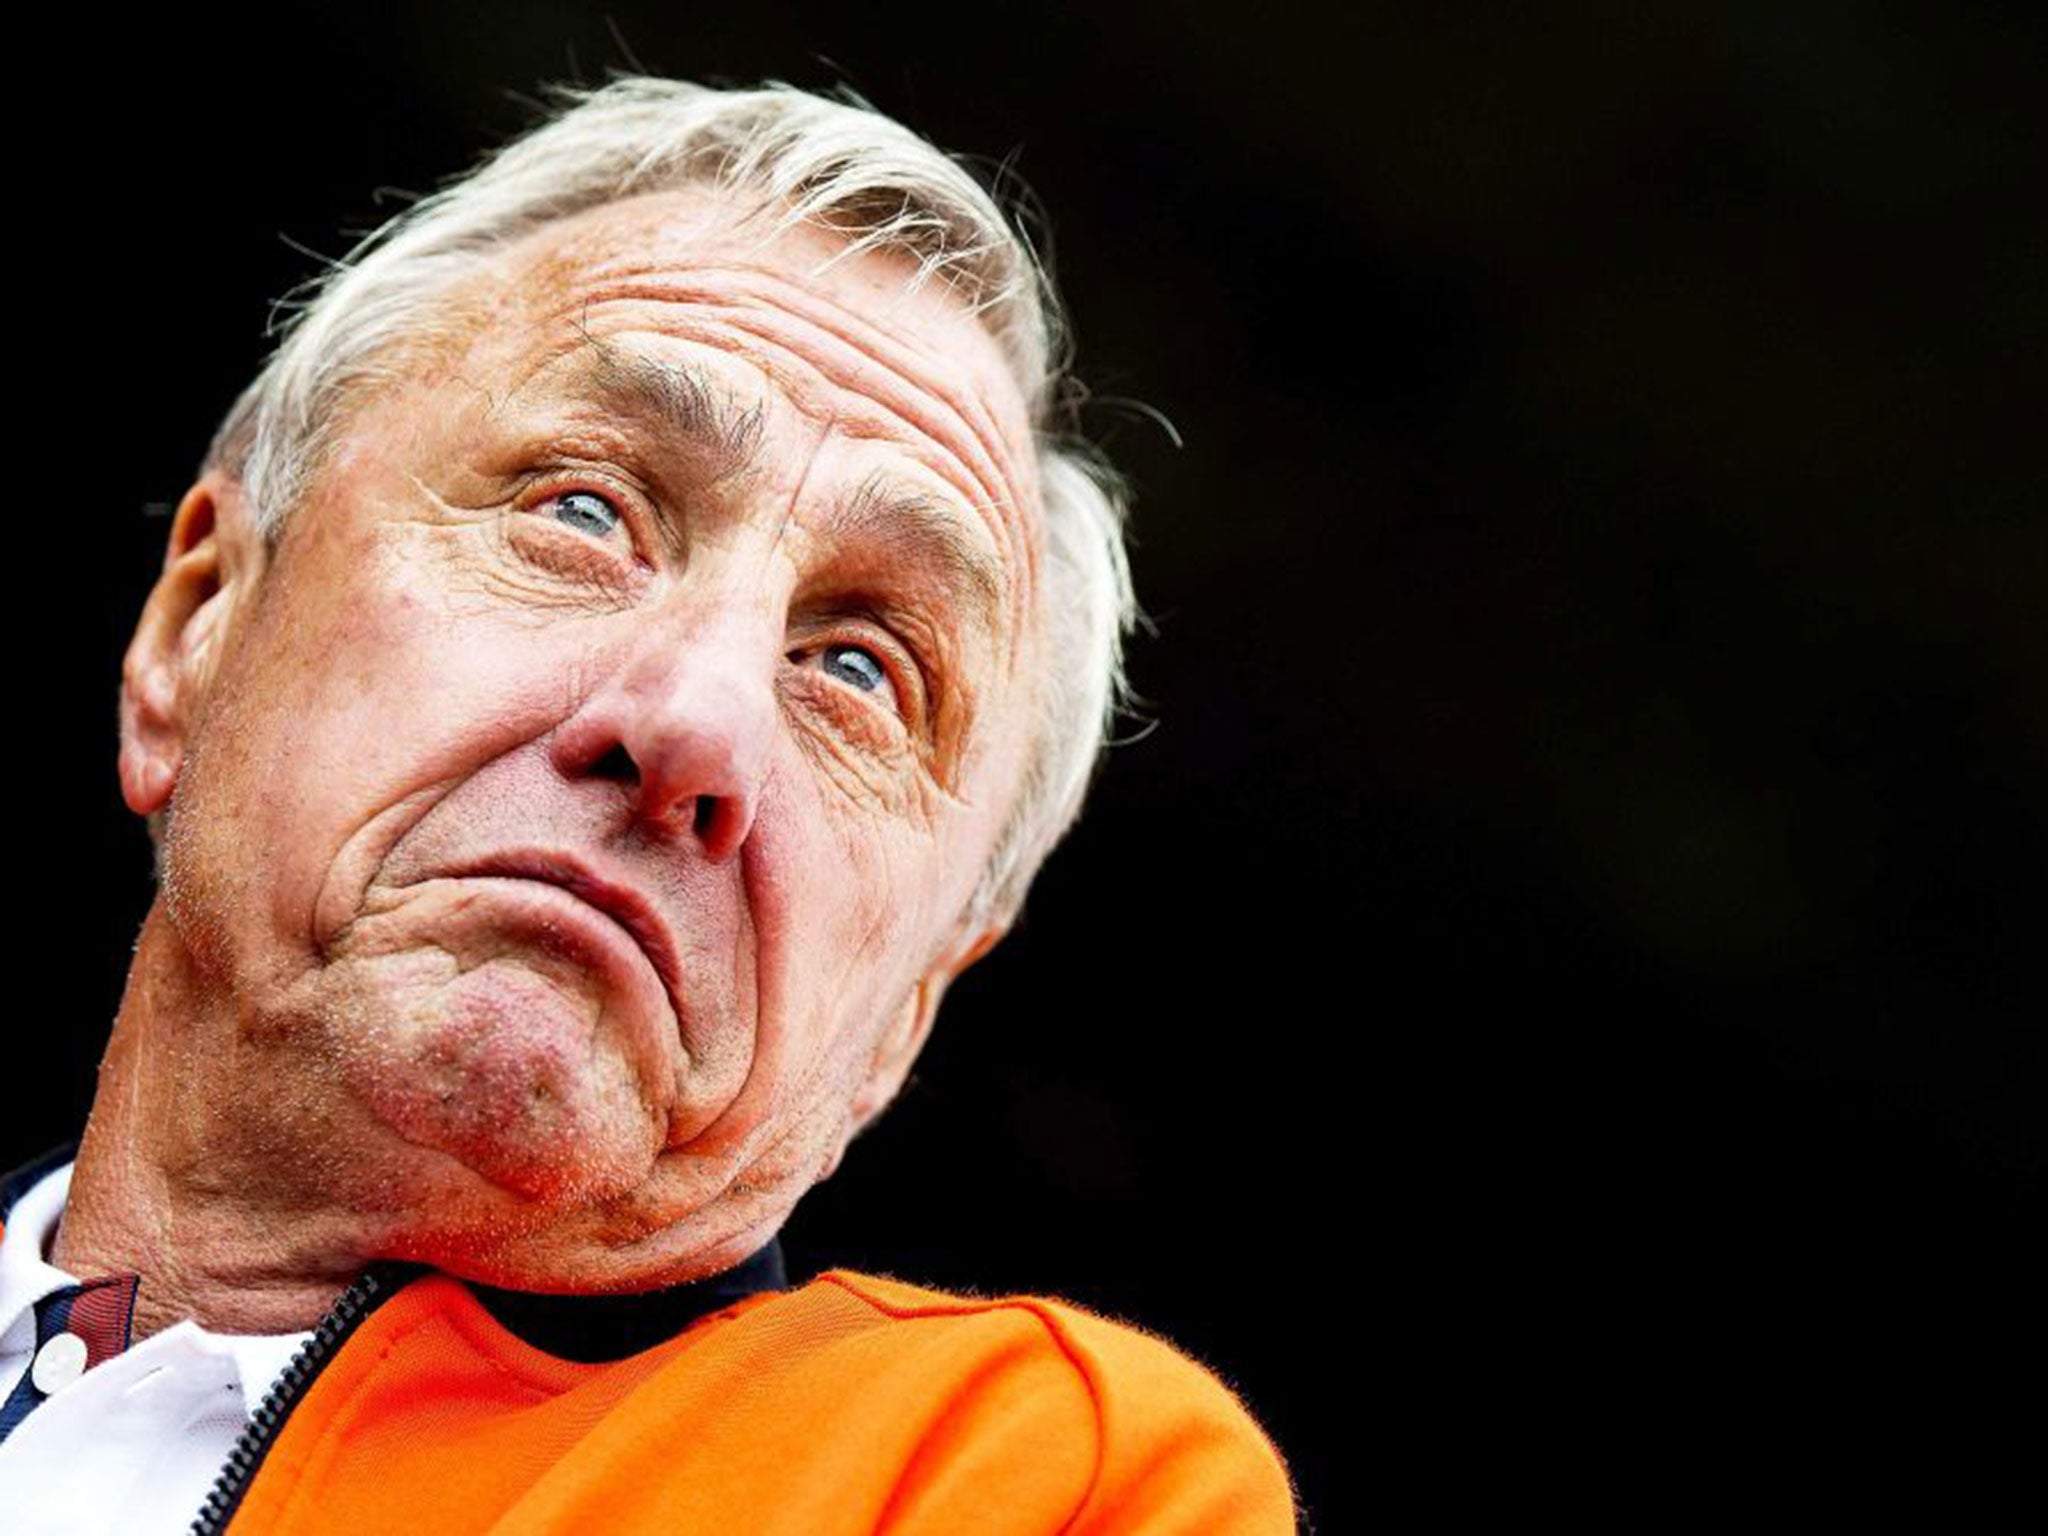 Cruyff: a strong-minded perfectionist, he could be a difficult and demanding coach